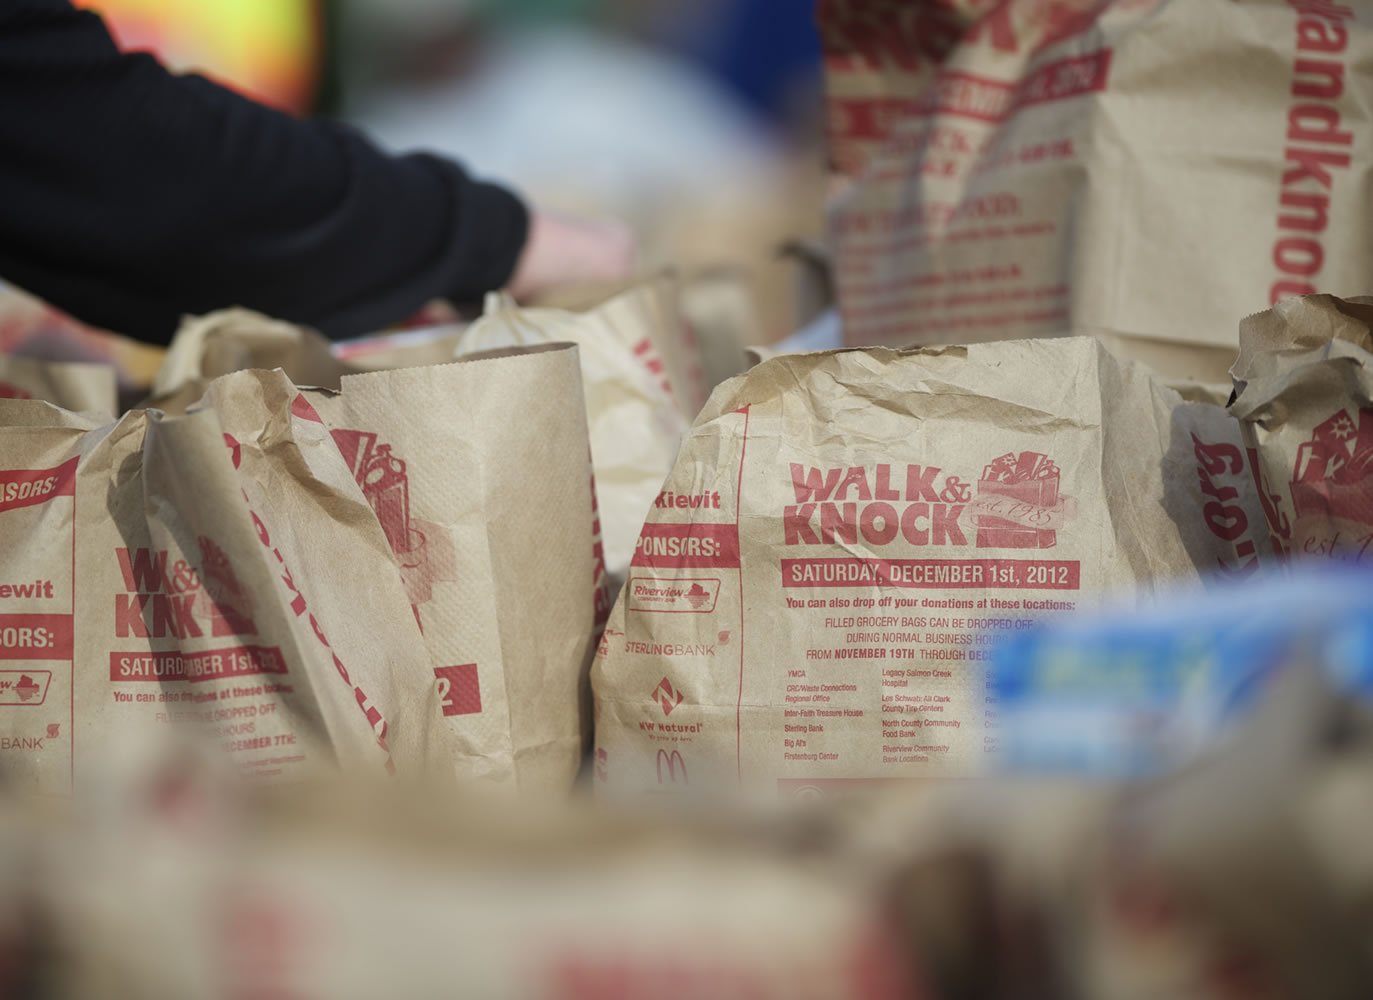 Heading into Saturday, the annual Walk and Knock food drive had five times collected more than 300,000 pounds of food in a single year.